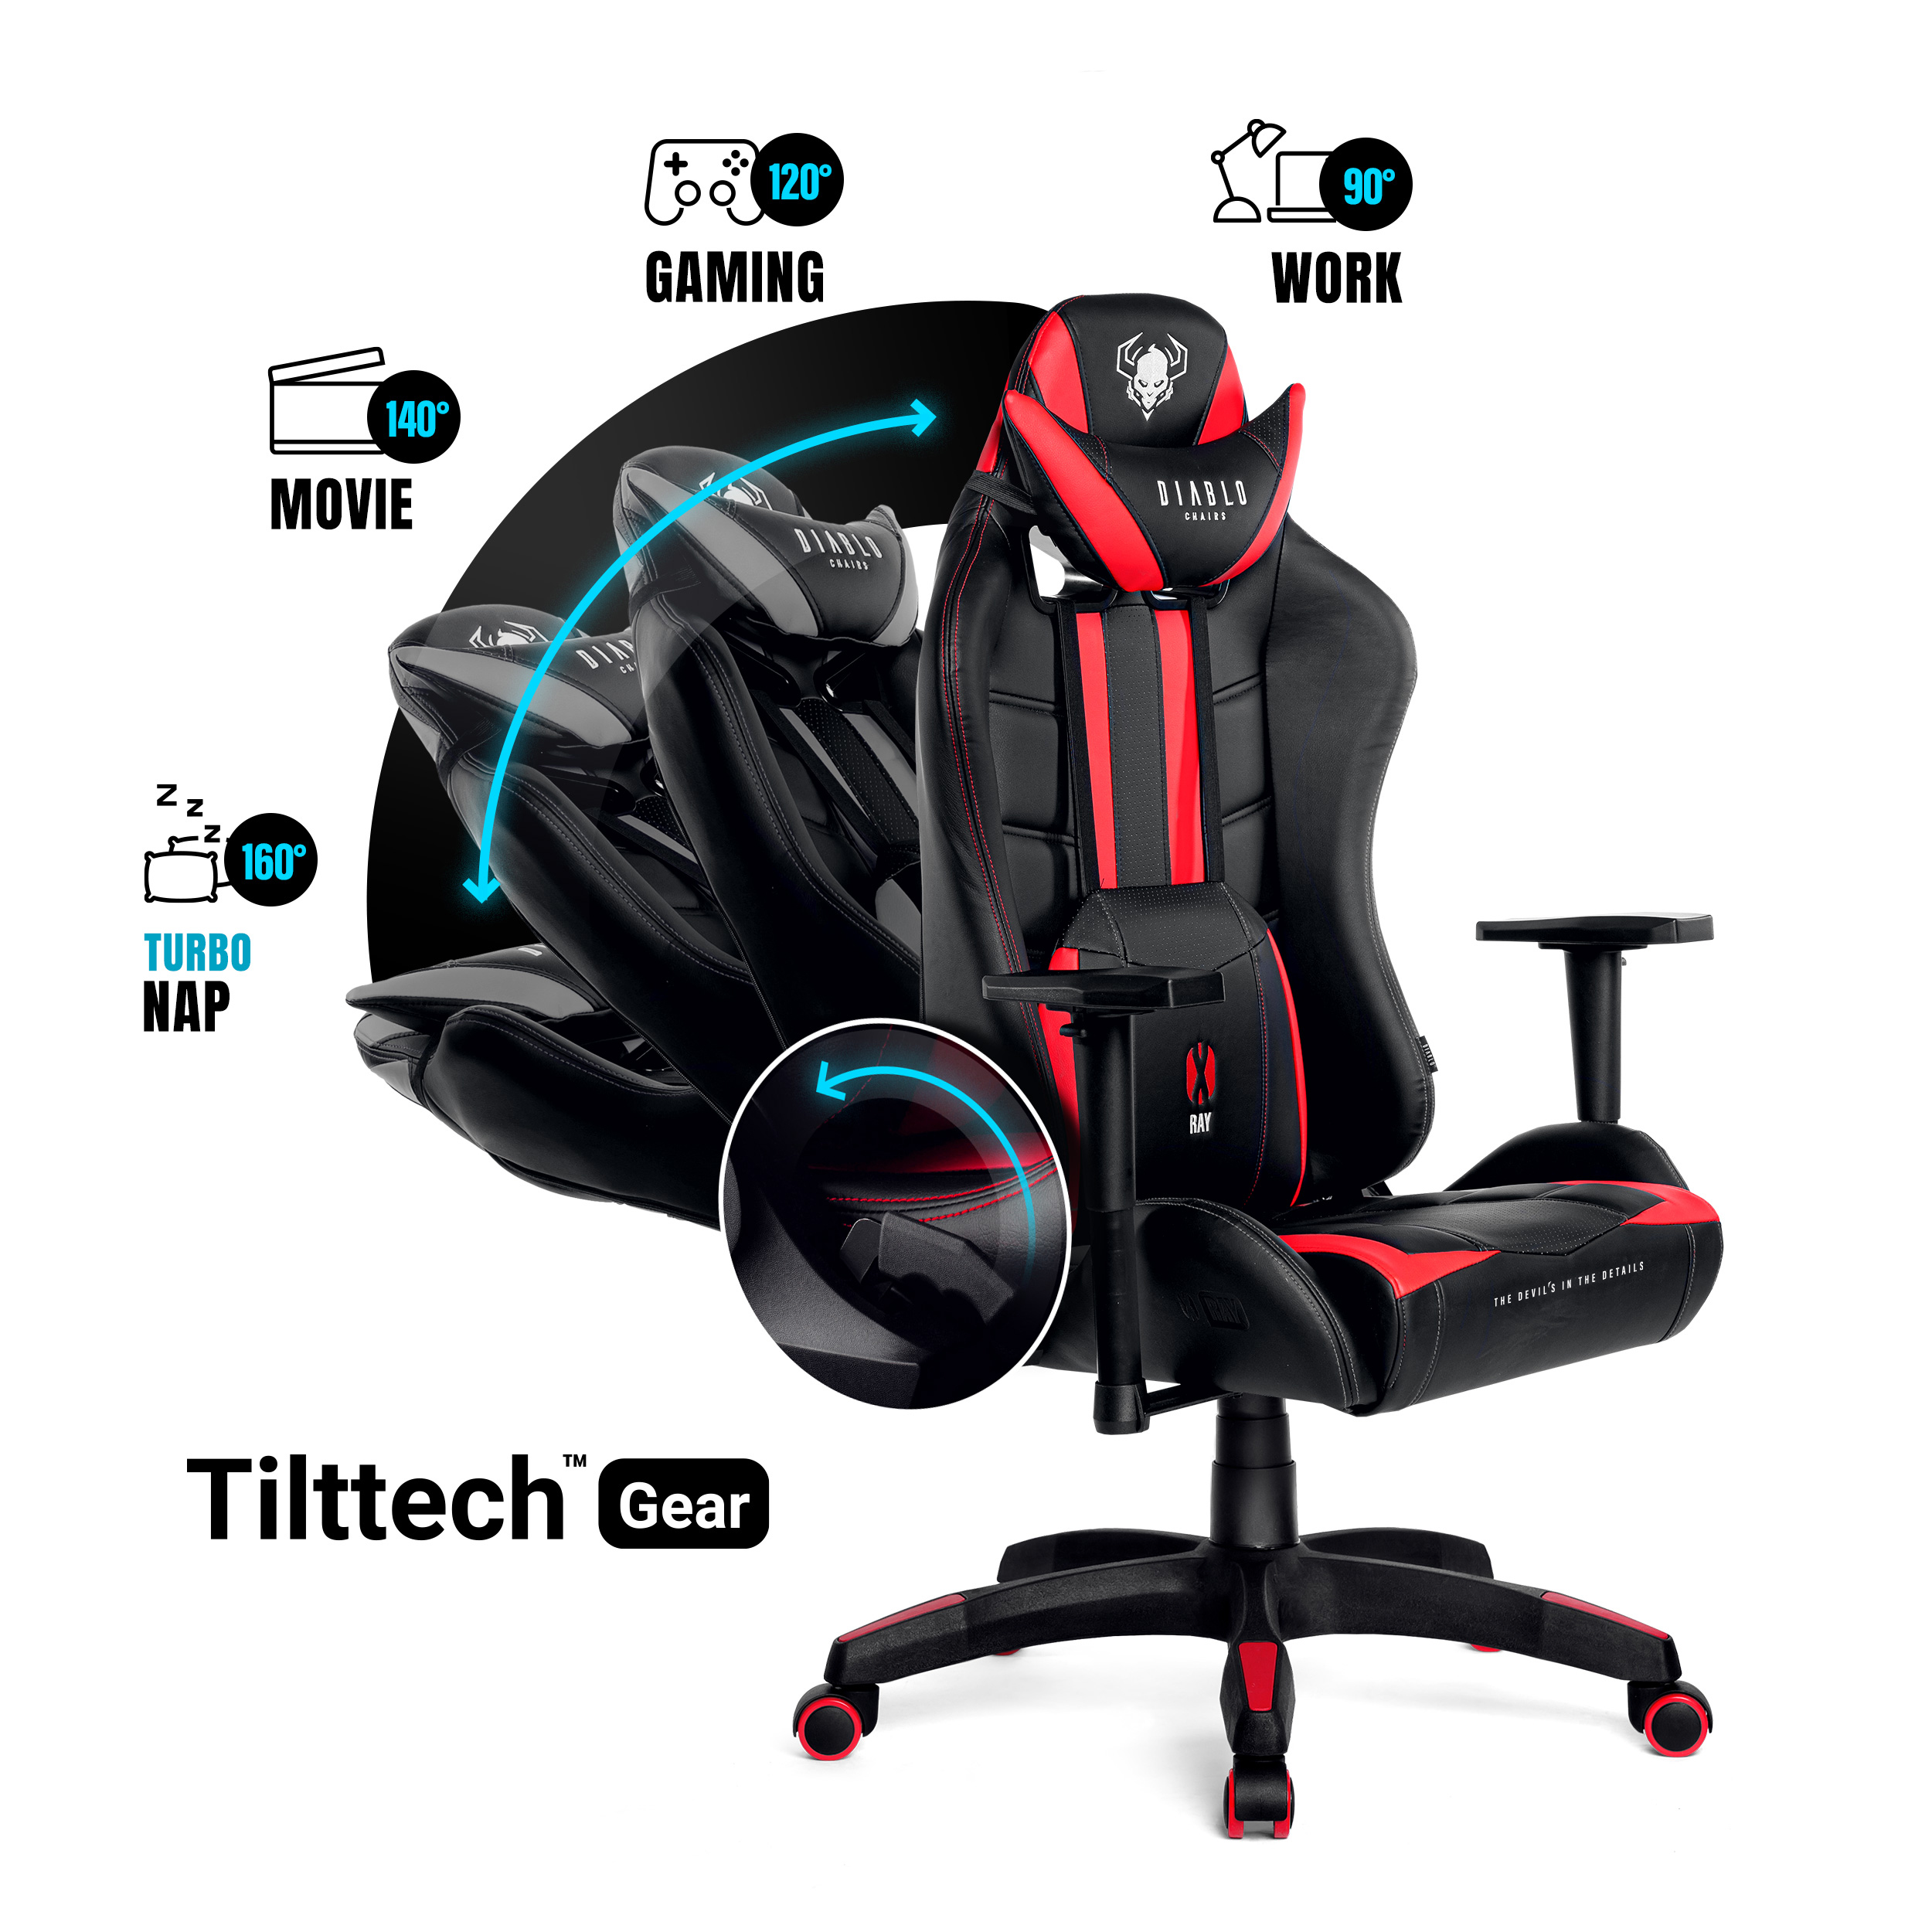 DIABLO CHAIRS Chair, X-RAY NORMAL Gaming black/red GAMING STUHL